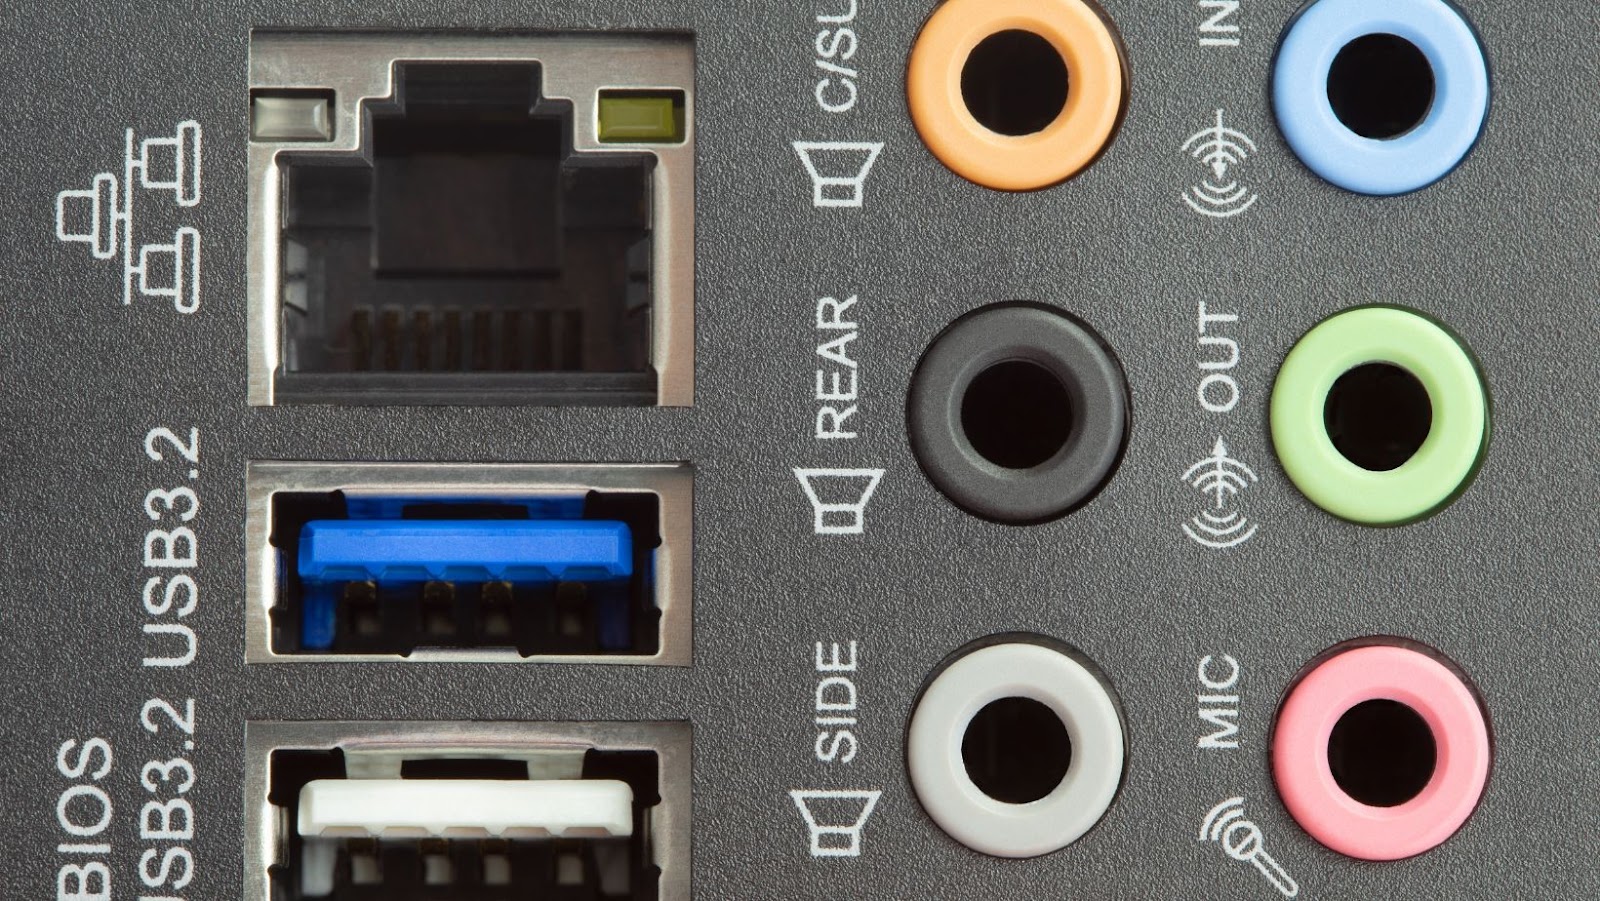 Dell XPS Desktop Audio Jacks: What Are They and How to Use Them?